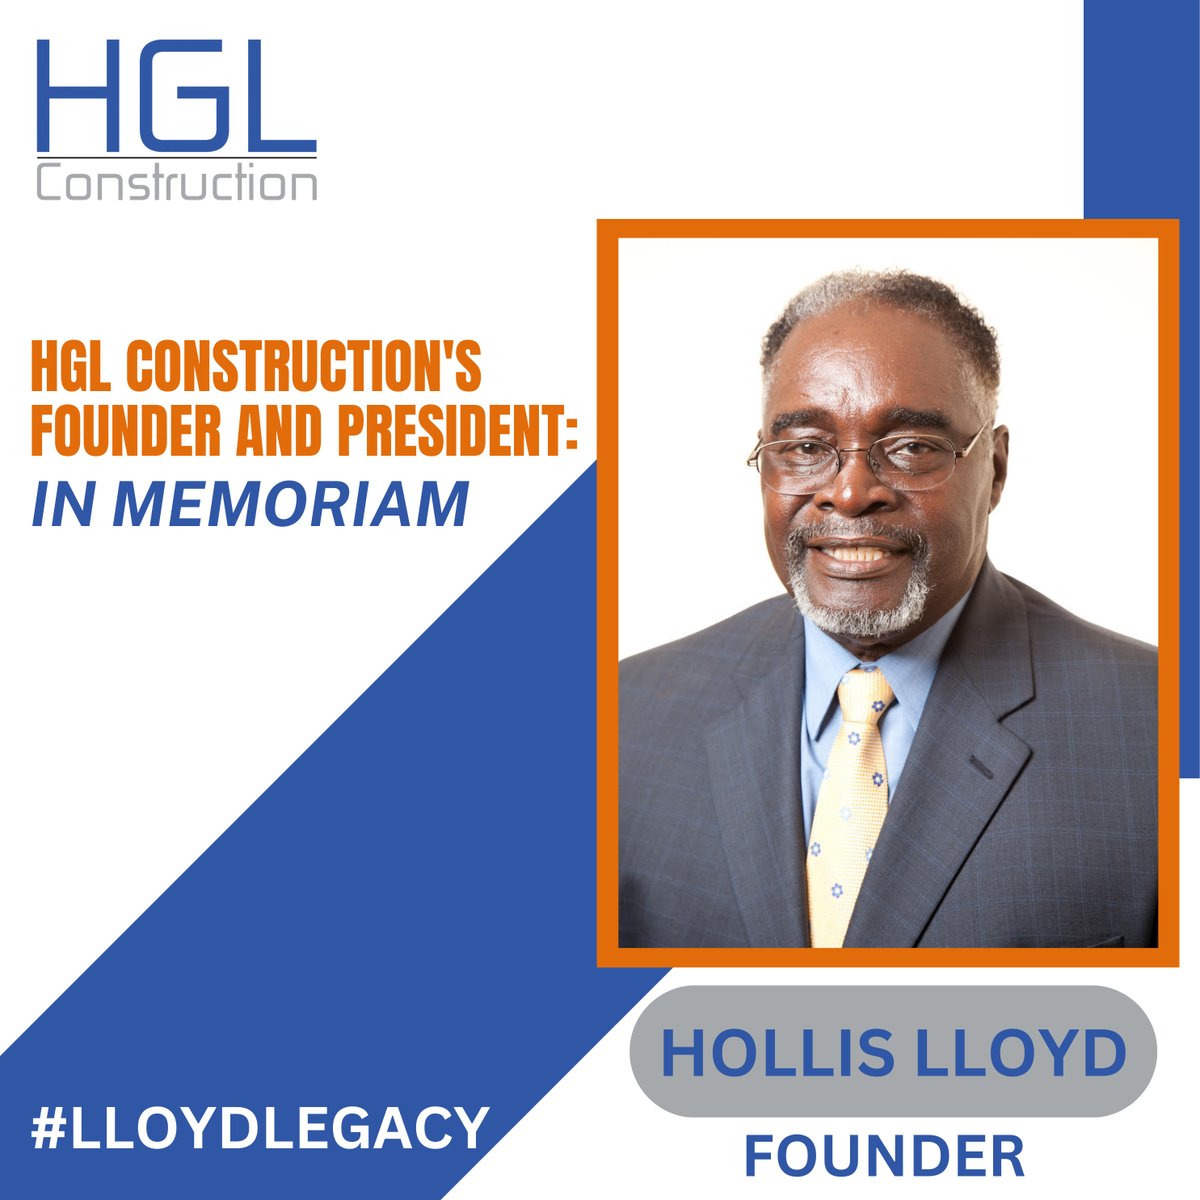 On the one-year anniversary of his passing, we want to take a moment to celebrate HGL’s founder and president, Mr. Hollis G. Lloyd.

Please join us today in honoring his monumental life and legacy.

#HGLConstruction #FamilyBusiness #LloydLegacy #InMemoriam